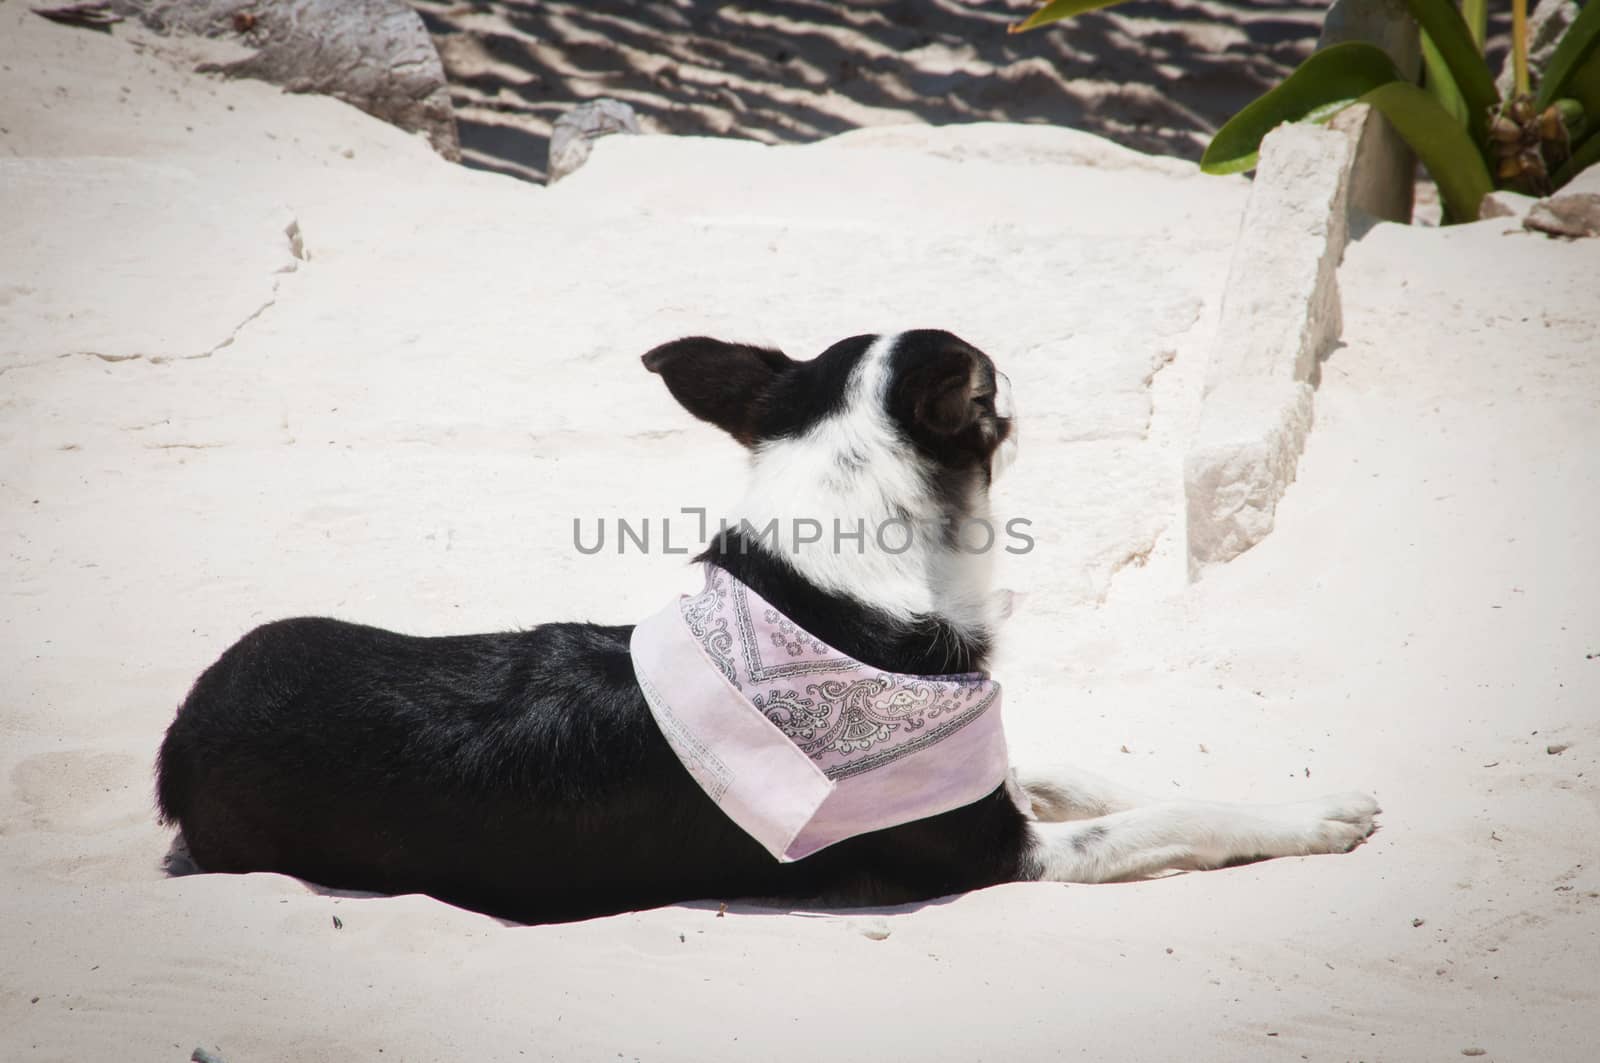 A dog relaxing on a beach